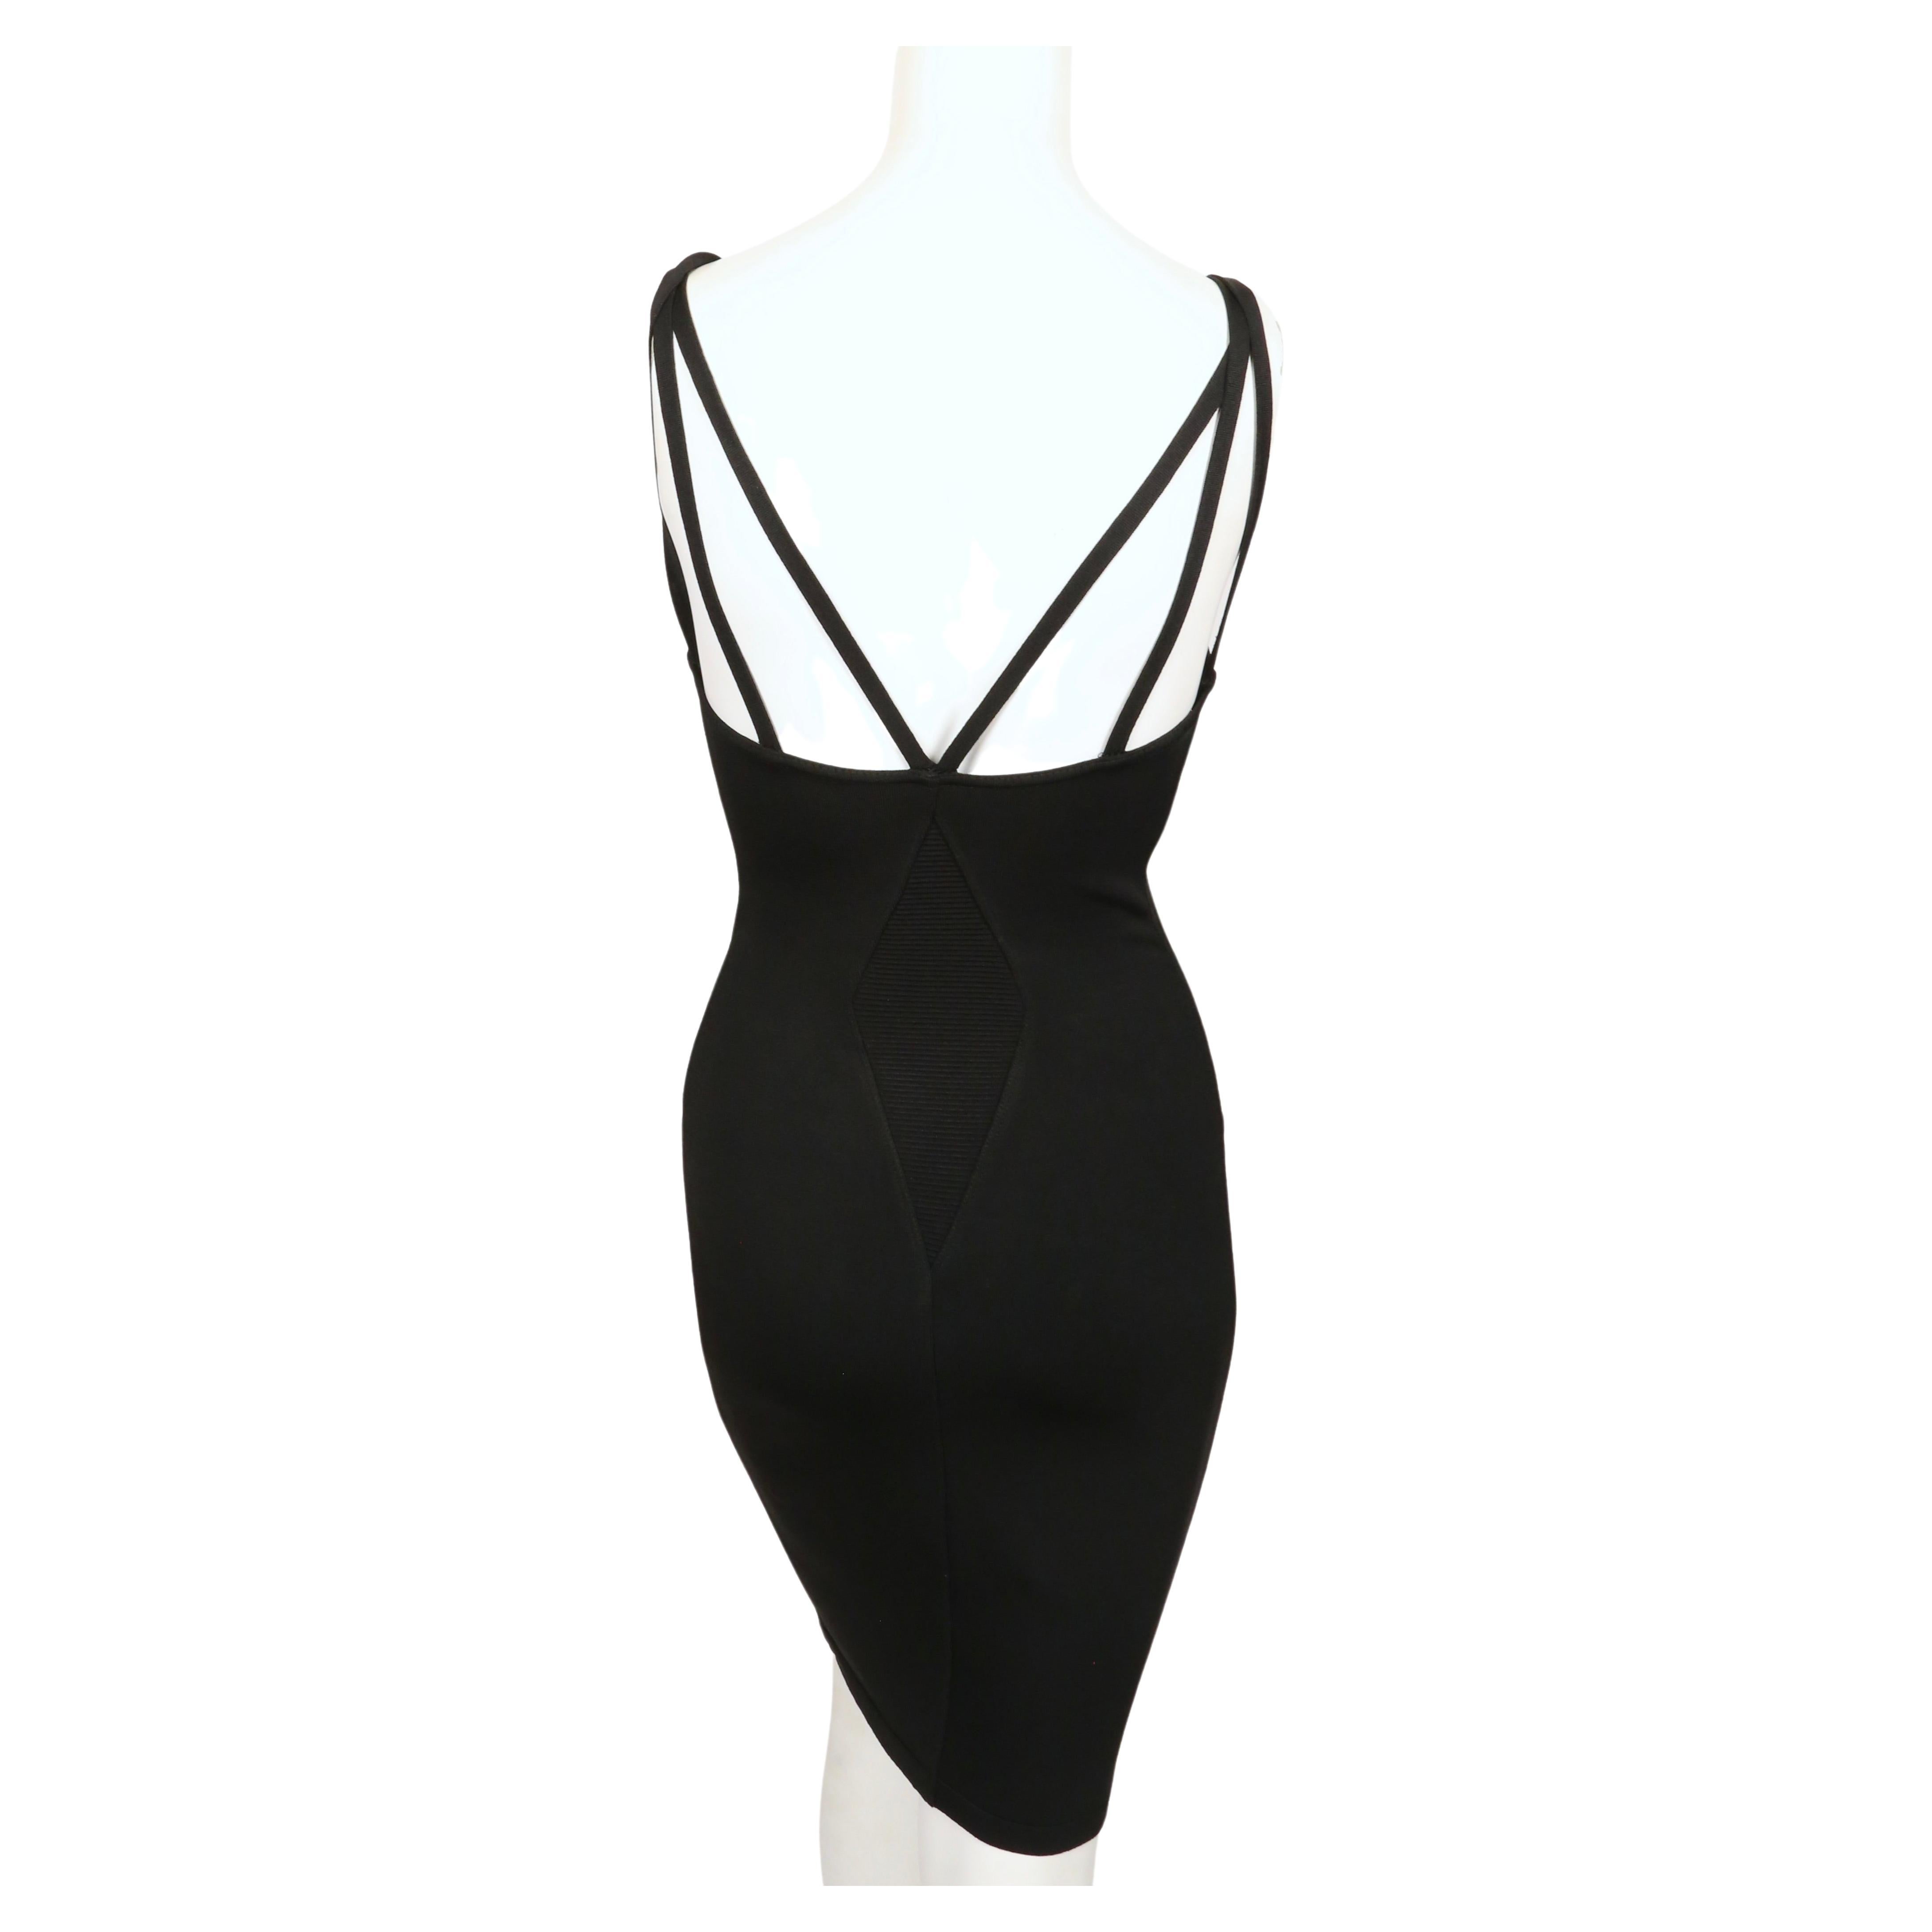 1990 AZZEDINE ALAIA black runway dress with strappy back For Sale 3